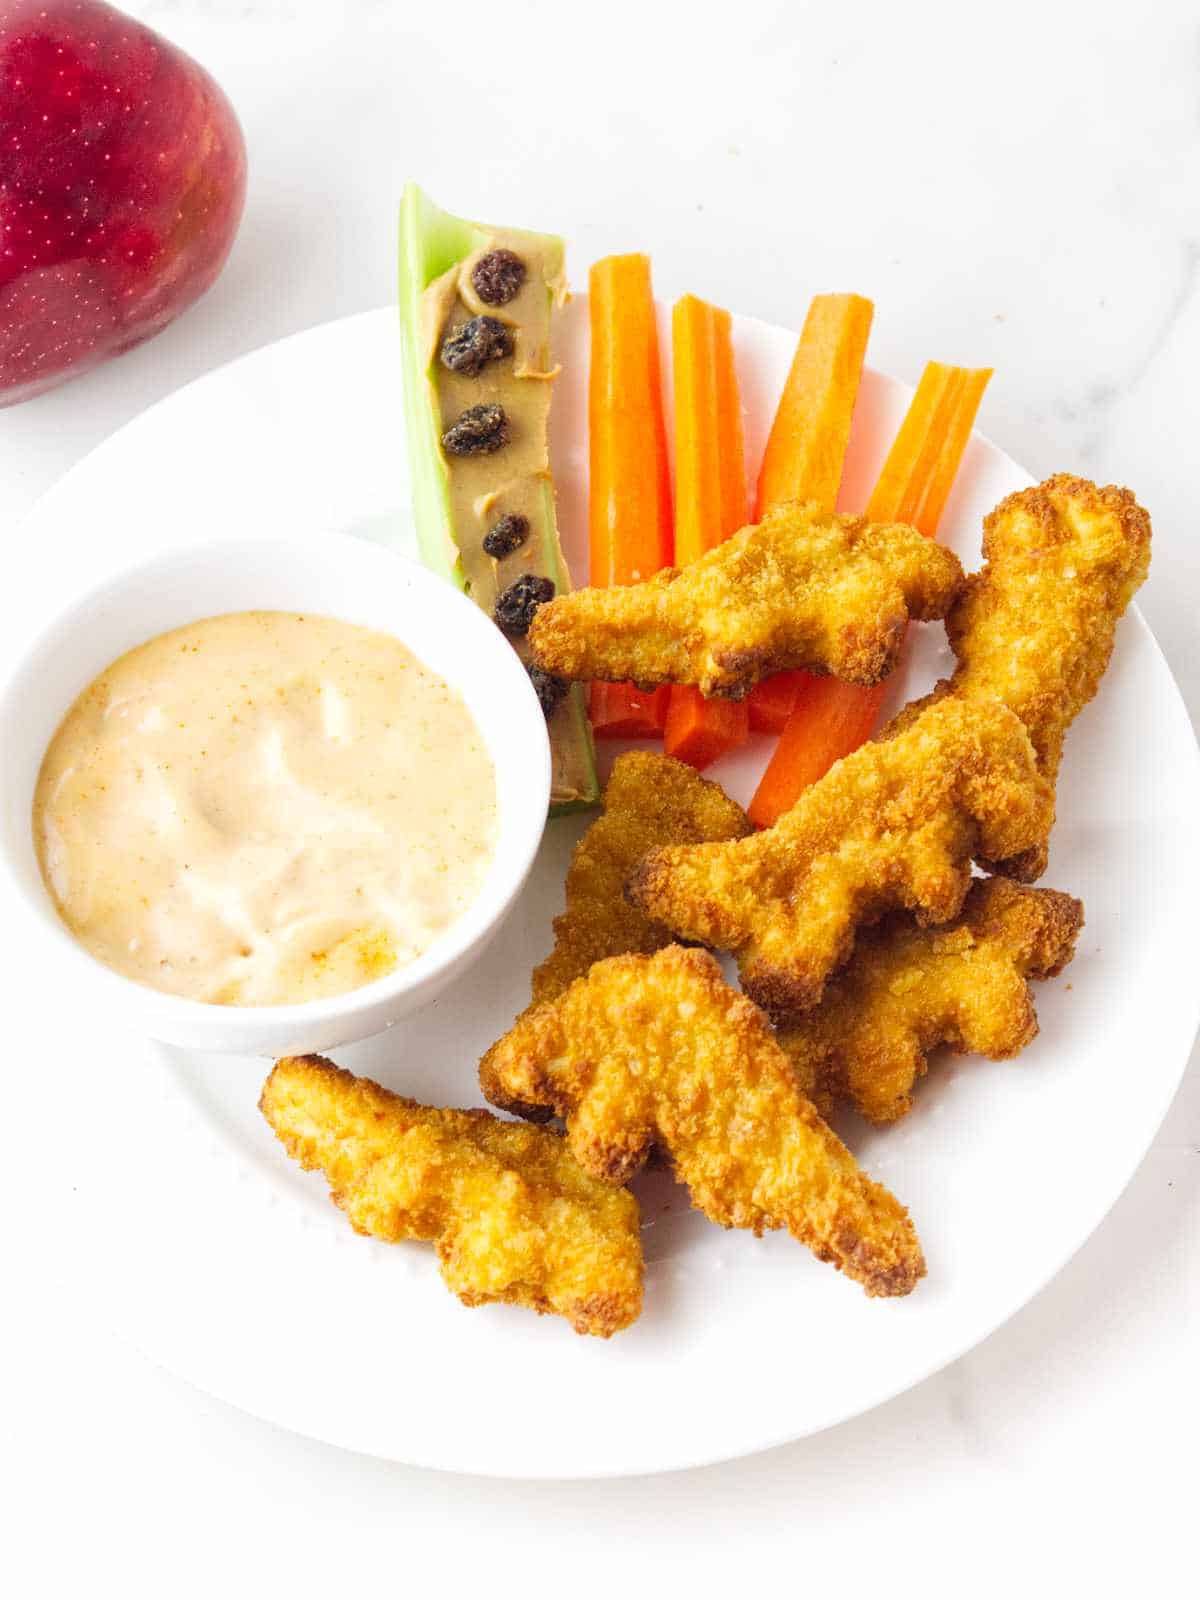 Child's lunch plate of air fried dino nuggets, carrot sticks, raisins on a peanut butter and celery stick, and dip on a white plate with a red apple nearby.